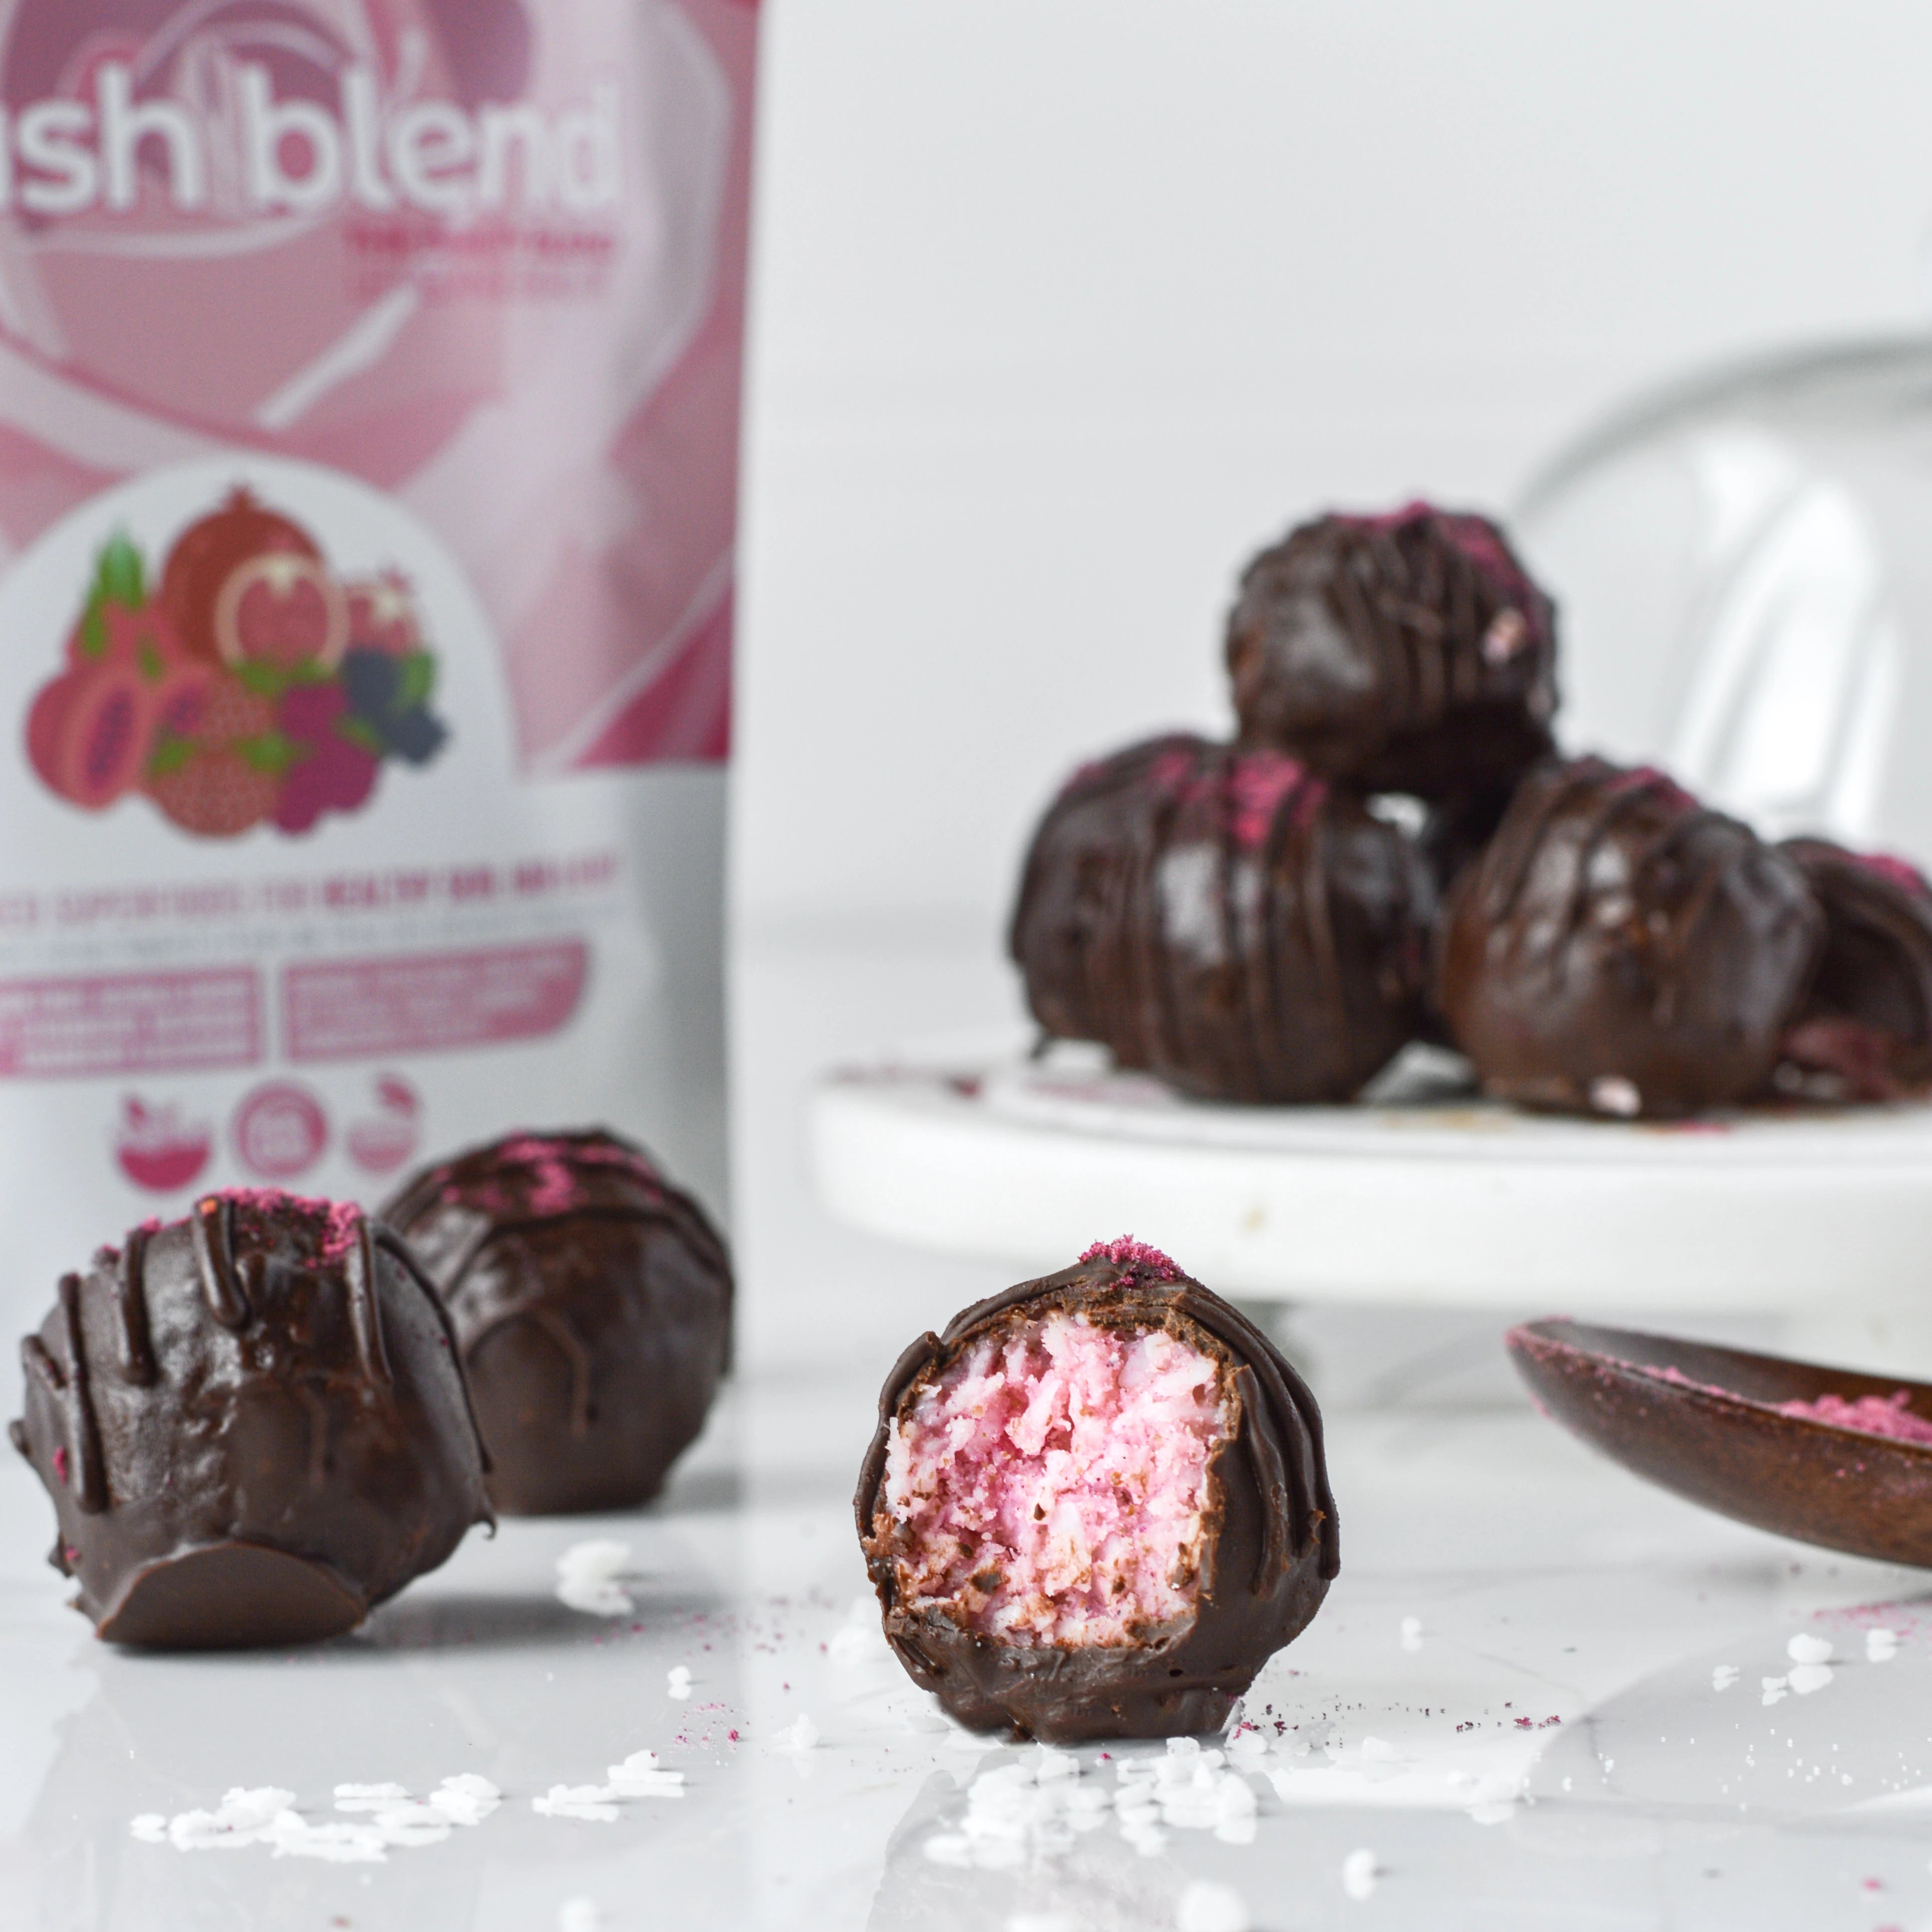 Blush Blend - packed with skin-loving ingredients and a wide range of antioxidants for skin, hair and heart health and is sure to satisfy your sweet tooth